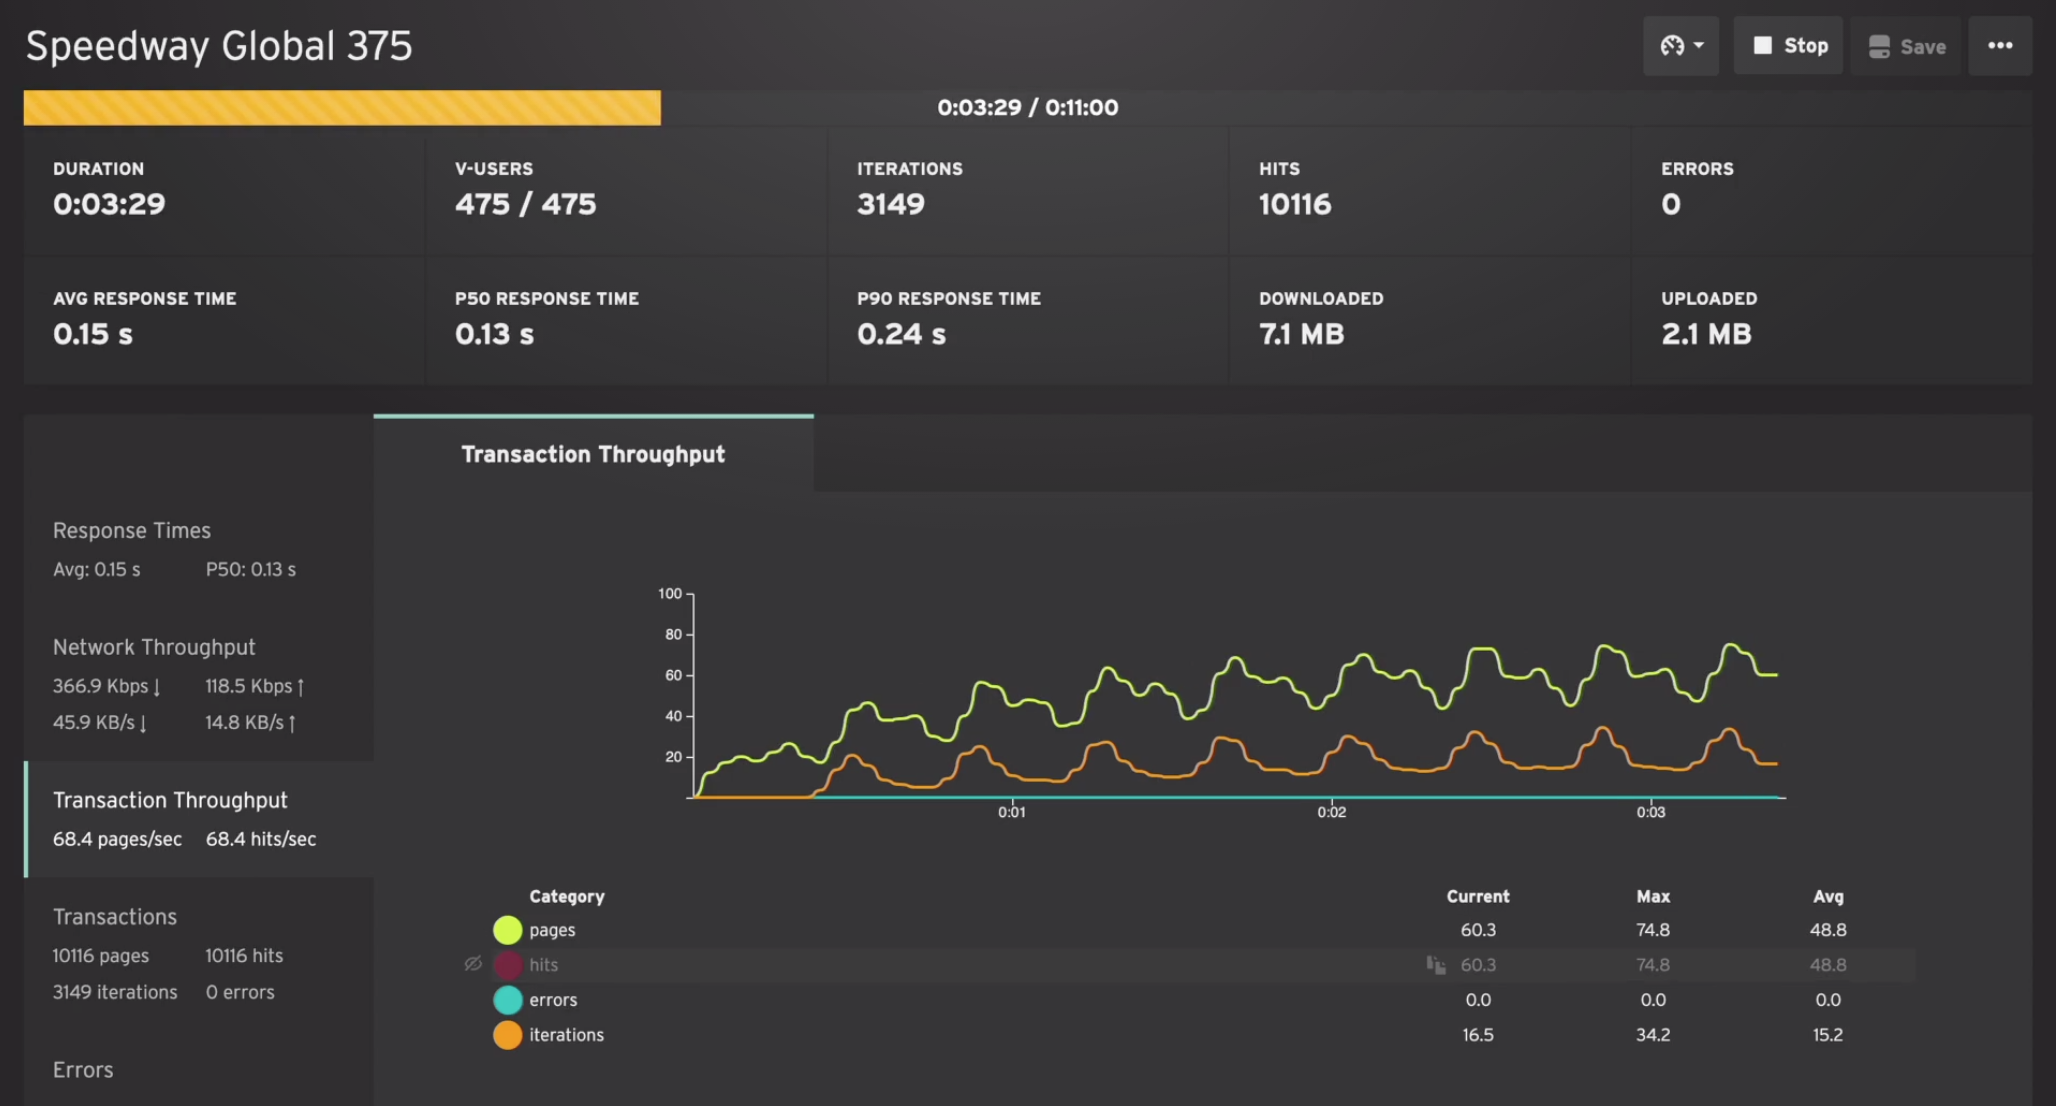 The test dashboard shows real-time stats while a test is running